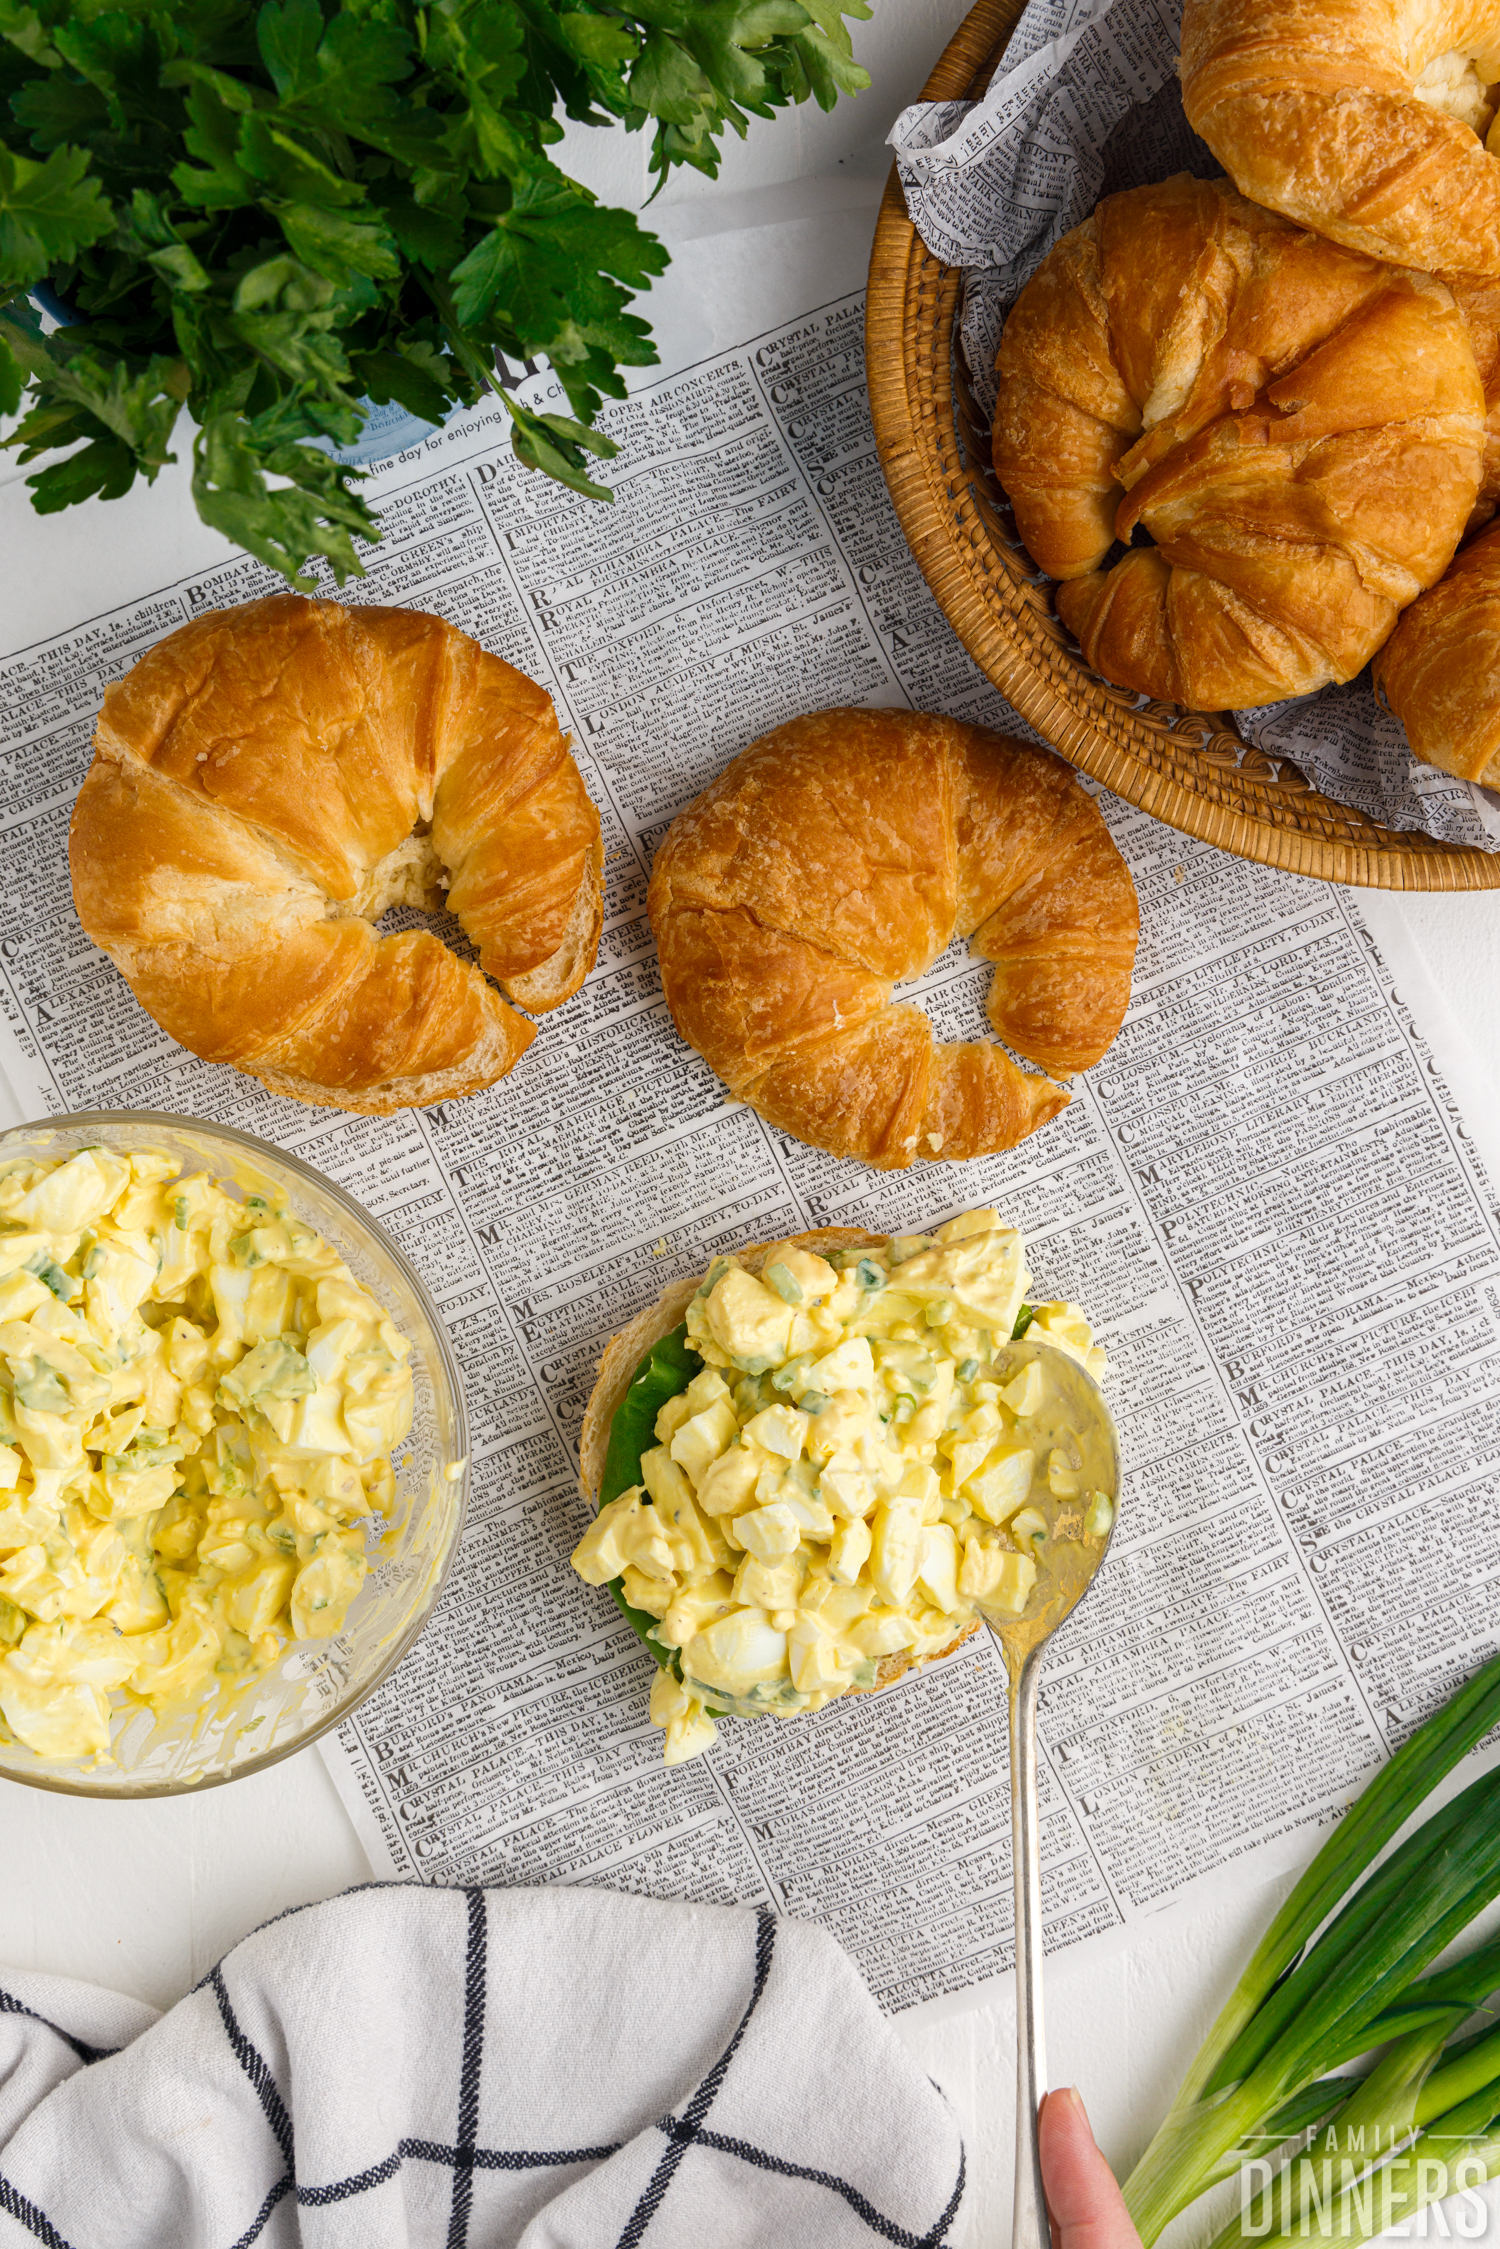 Croissants cut open with egg salad mixture being spooned on top.